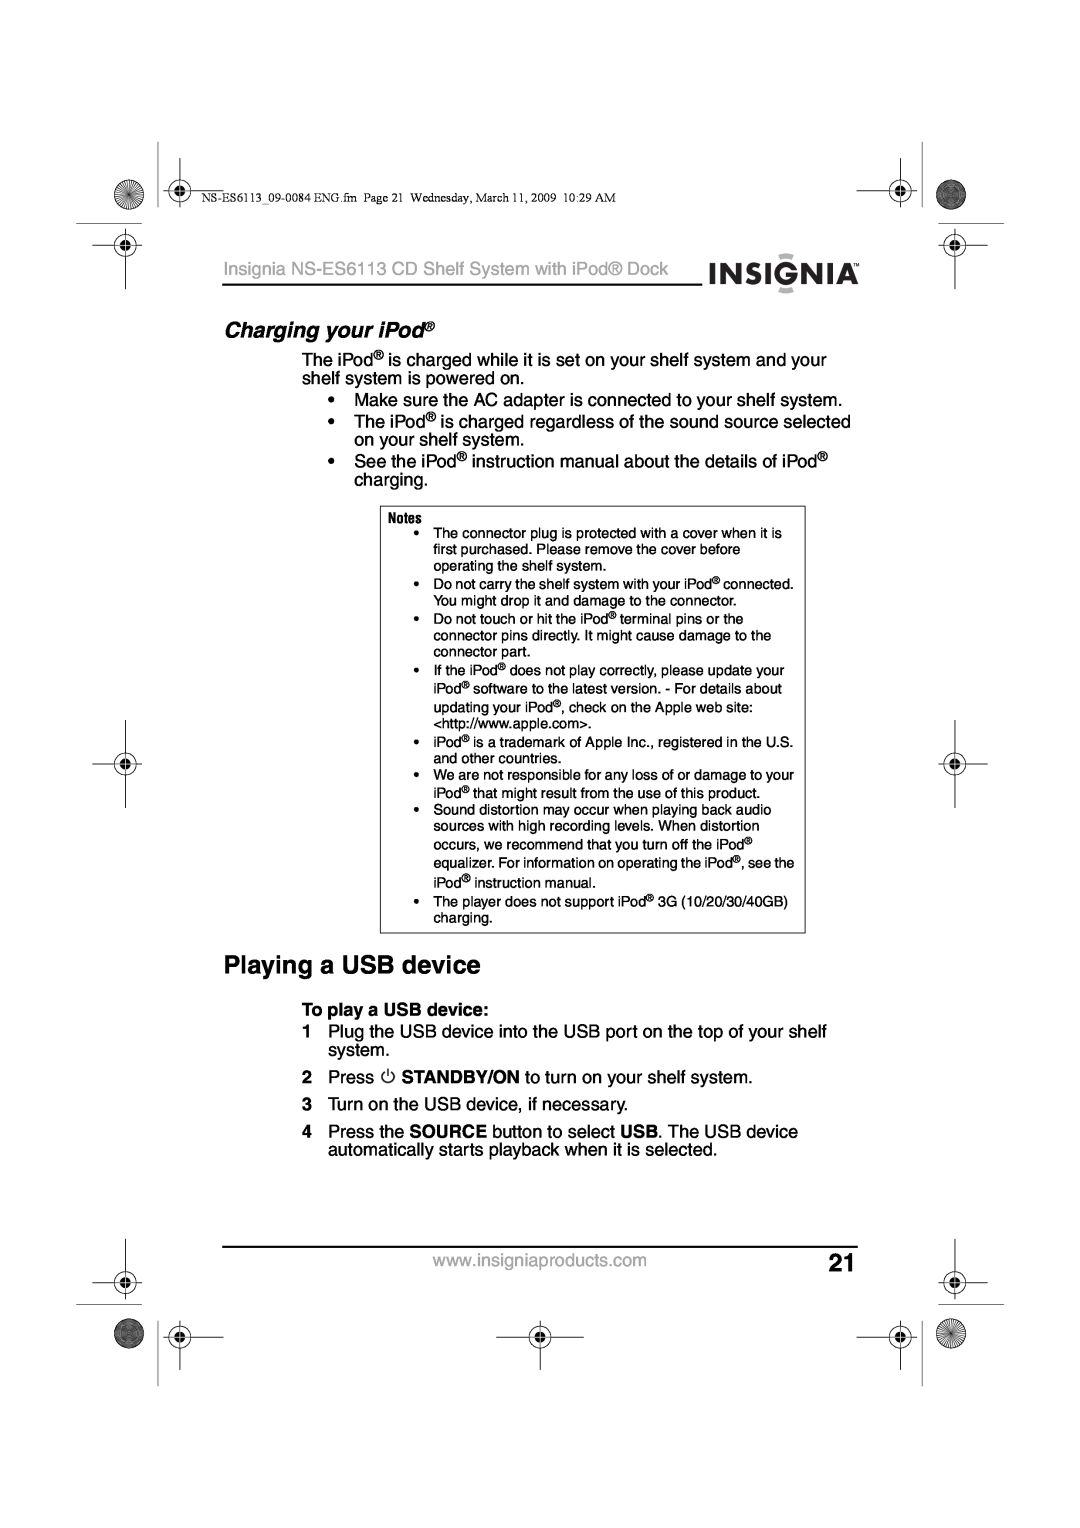 Insignia NS-ES6113 manual Playing a USB device, Charging your iPod, To play a USB device 